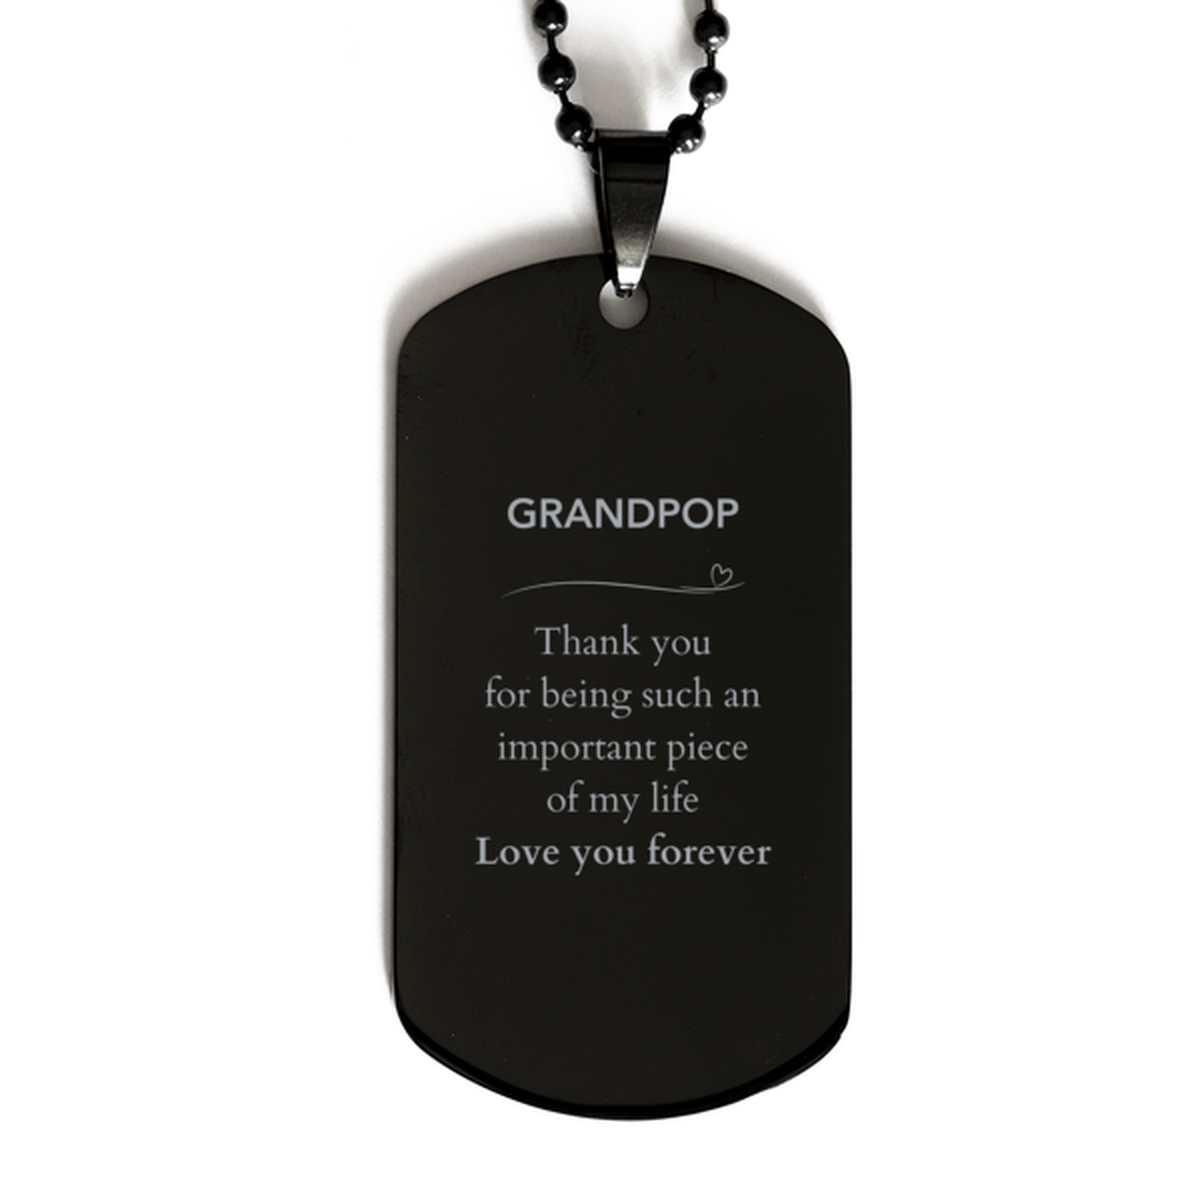 Appropriate Grandpop Black Dog Tag Epic Birthday Gifts for Grandpop Thank you for being such an important piece of my life Grandpop Christmas Mothers Fathers Day